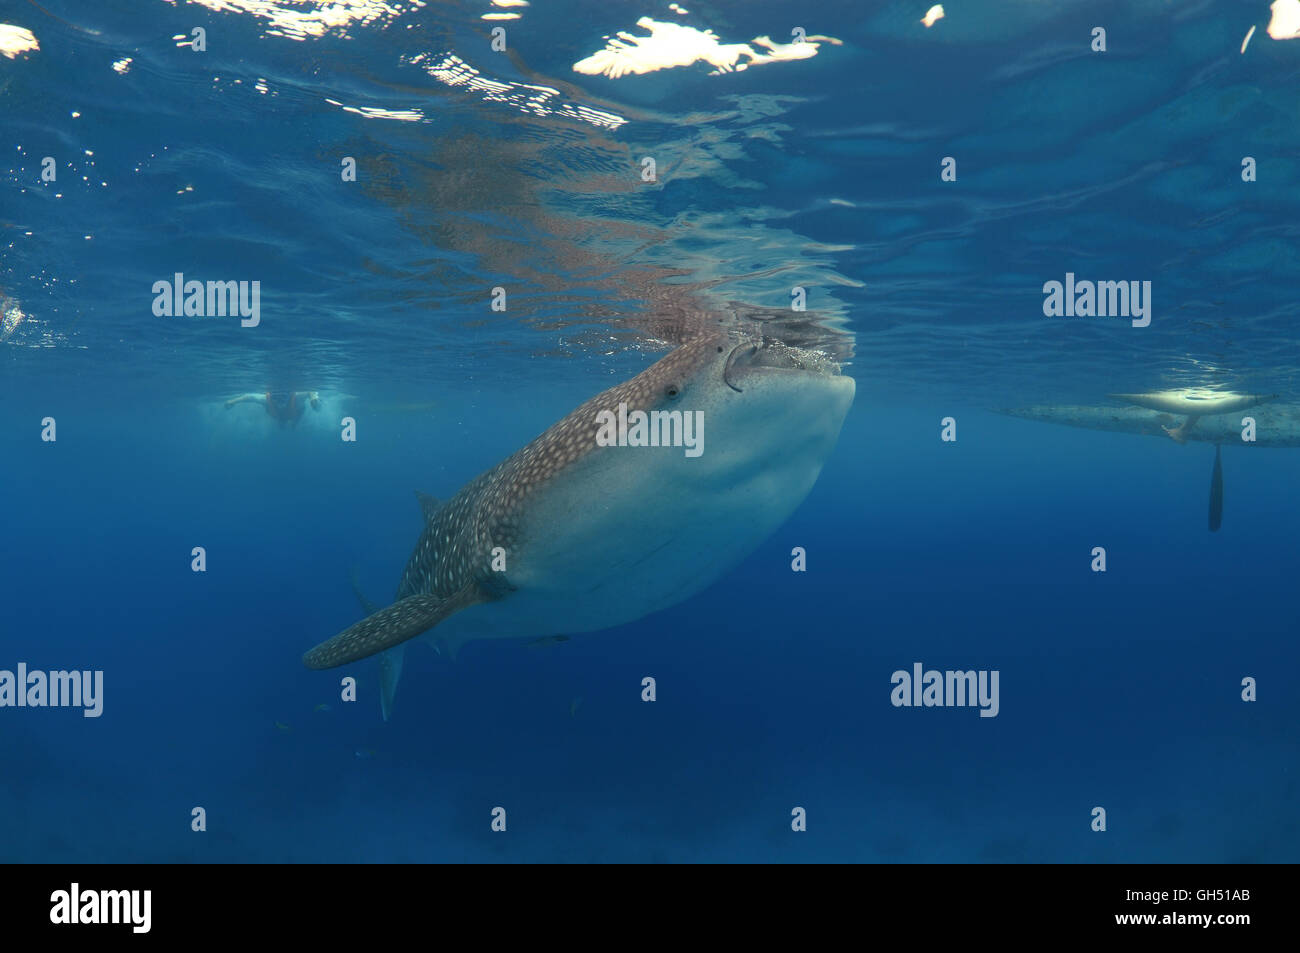 Whale shark or basking shark (Rhincodon typus) Indo-Pacific, Philippines, Southeast Asia Stock Photo